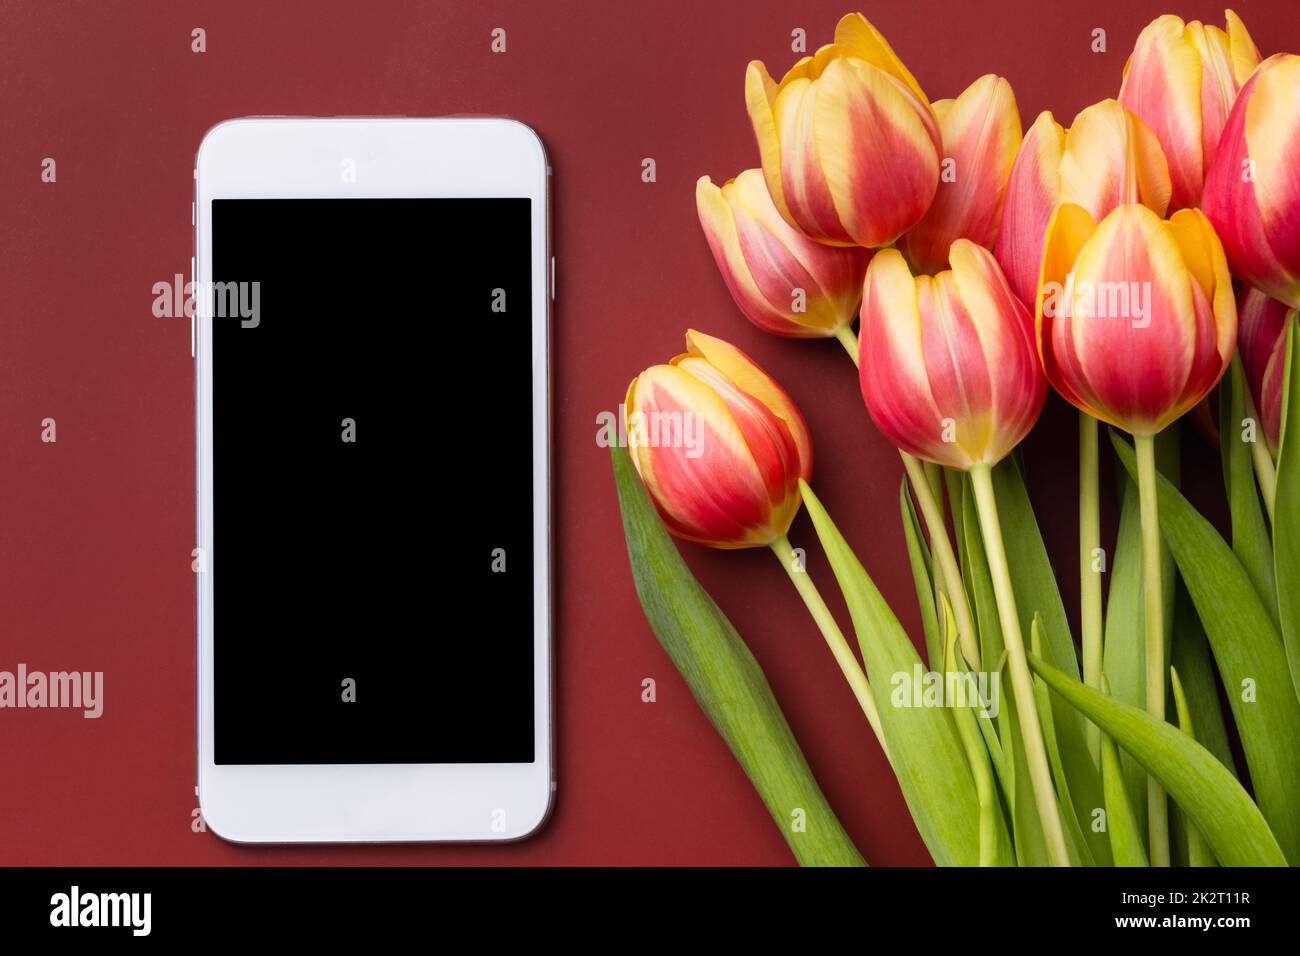 Smartphone mockup with tulips on claret background. Device screen mock up for presentation or appl design Stock Photo